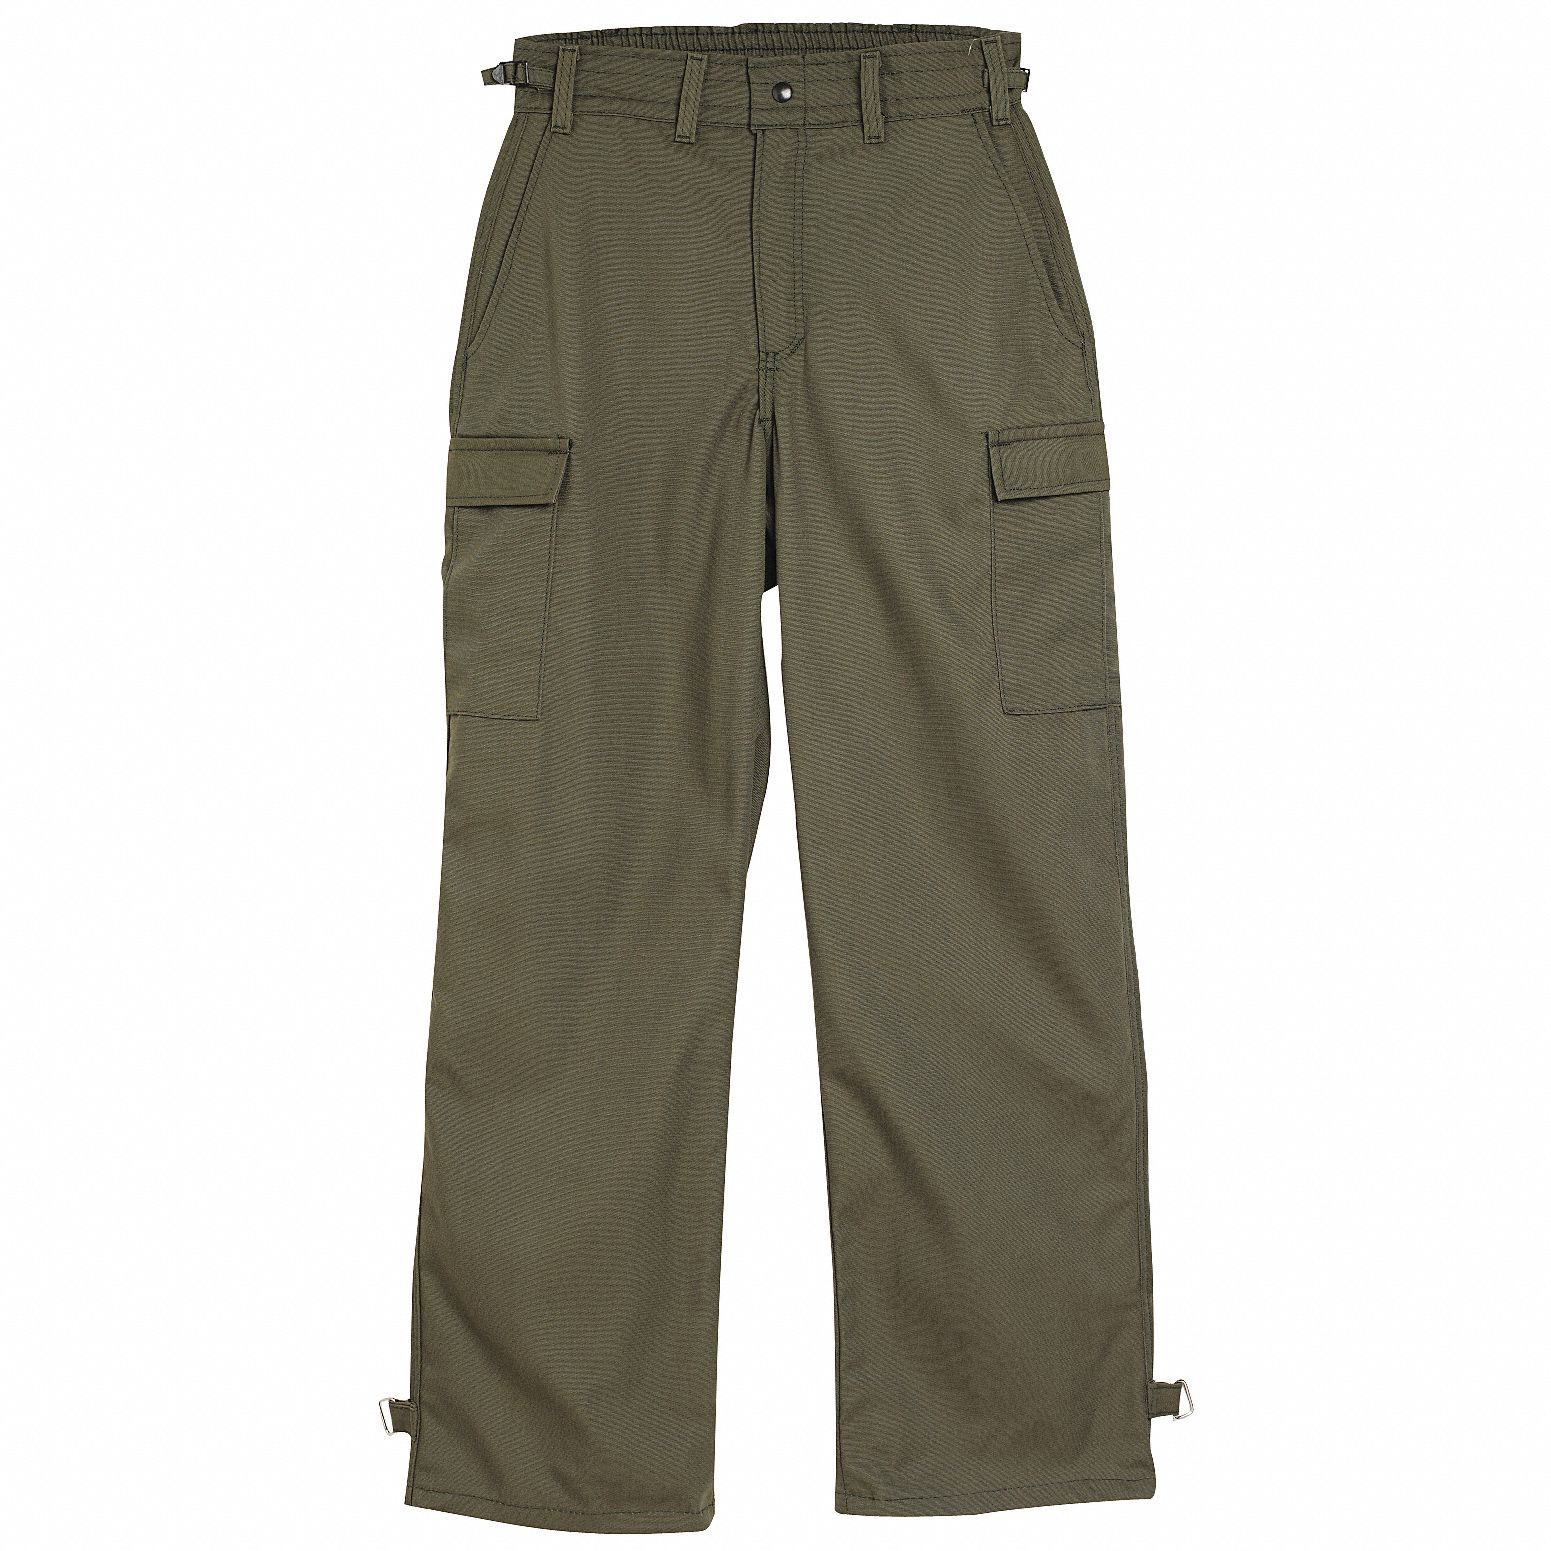 Indura Ultra Soft Wildland Fire Pants, Olive Green, 28 in Inseam, Fits Waist Size 43 to 47 in